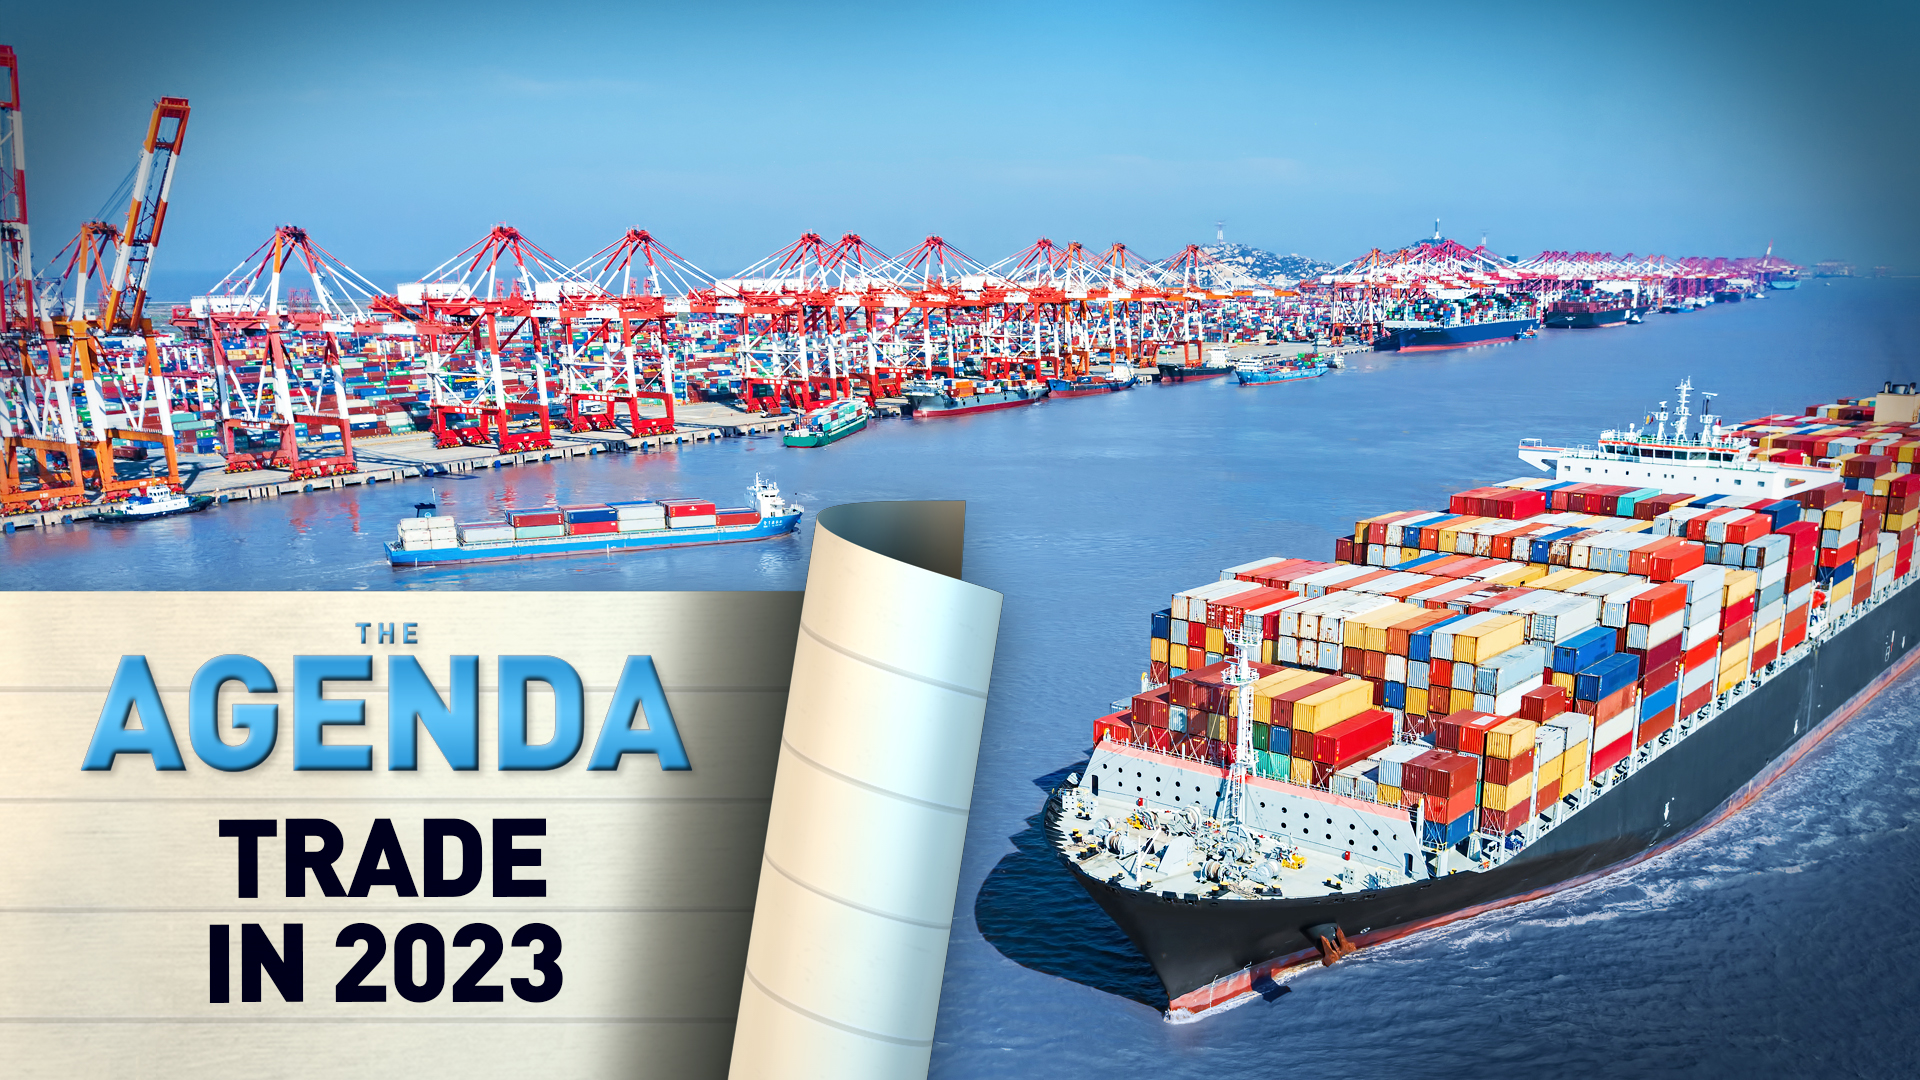 Global trade totaled $25tln in 2022 so what can we expect in 2023?